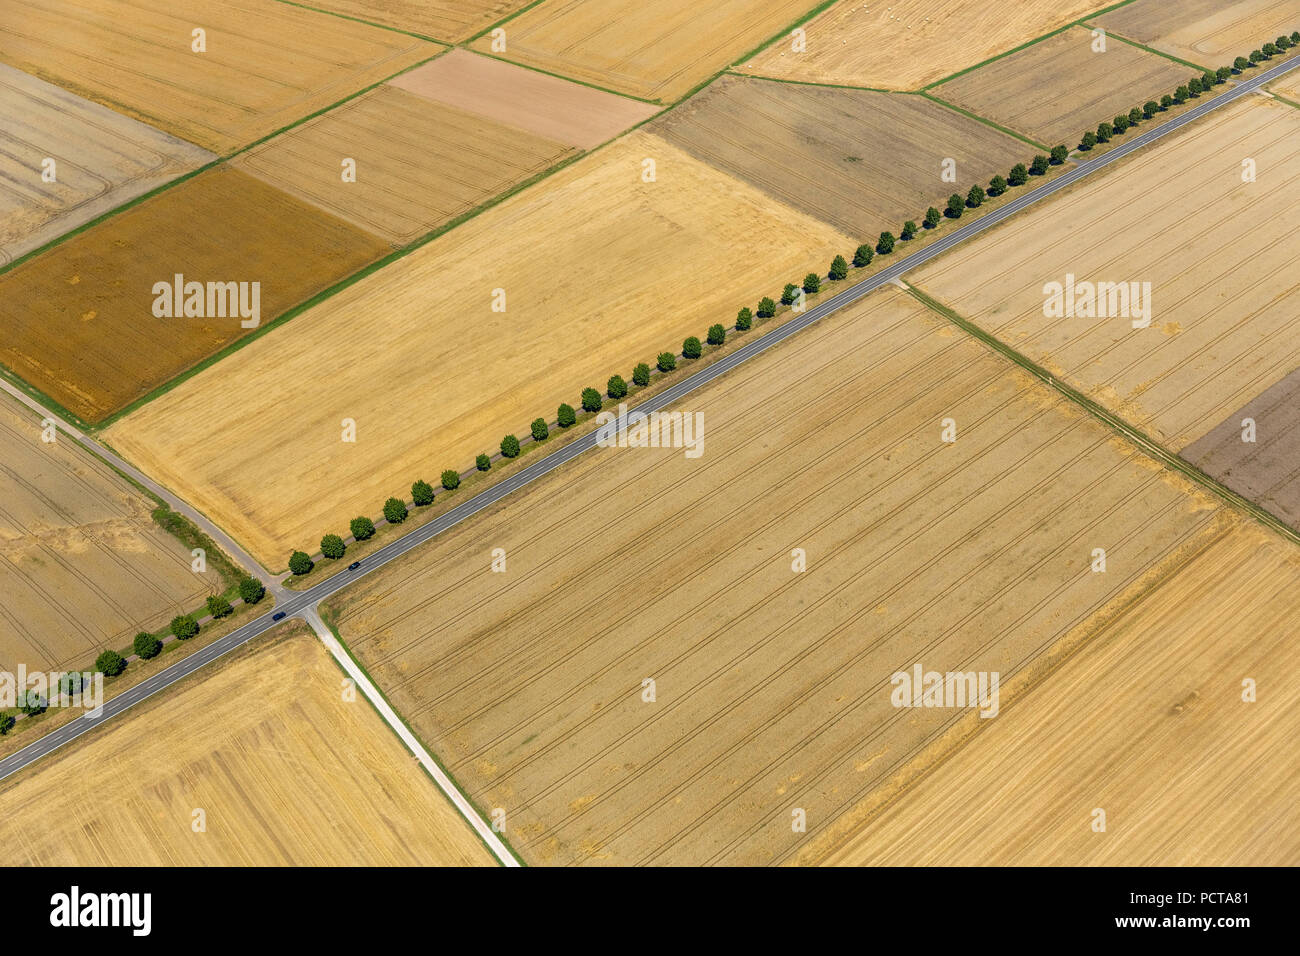 Harvested grain fields, tree-lined road in grain fields, land parcels, agriculture, Limburg an der Lahn, district town of Limburg-Weilburg (district), Hesse, Germany Stock Photo